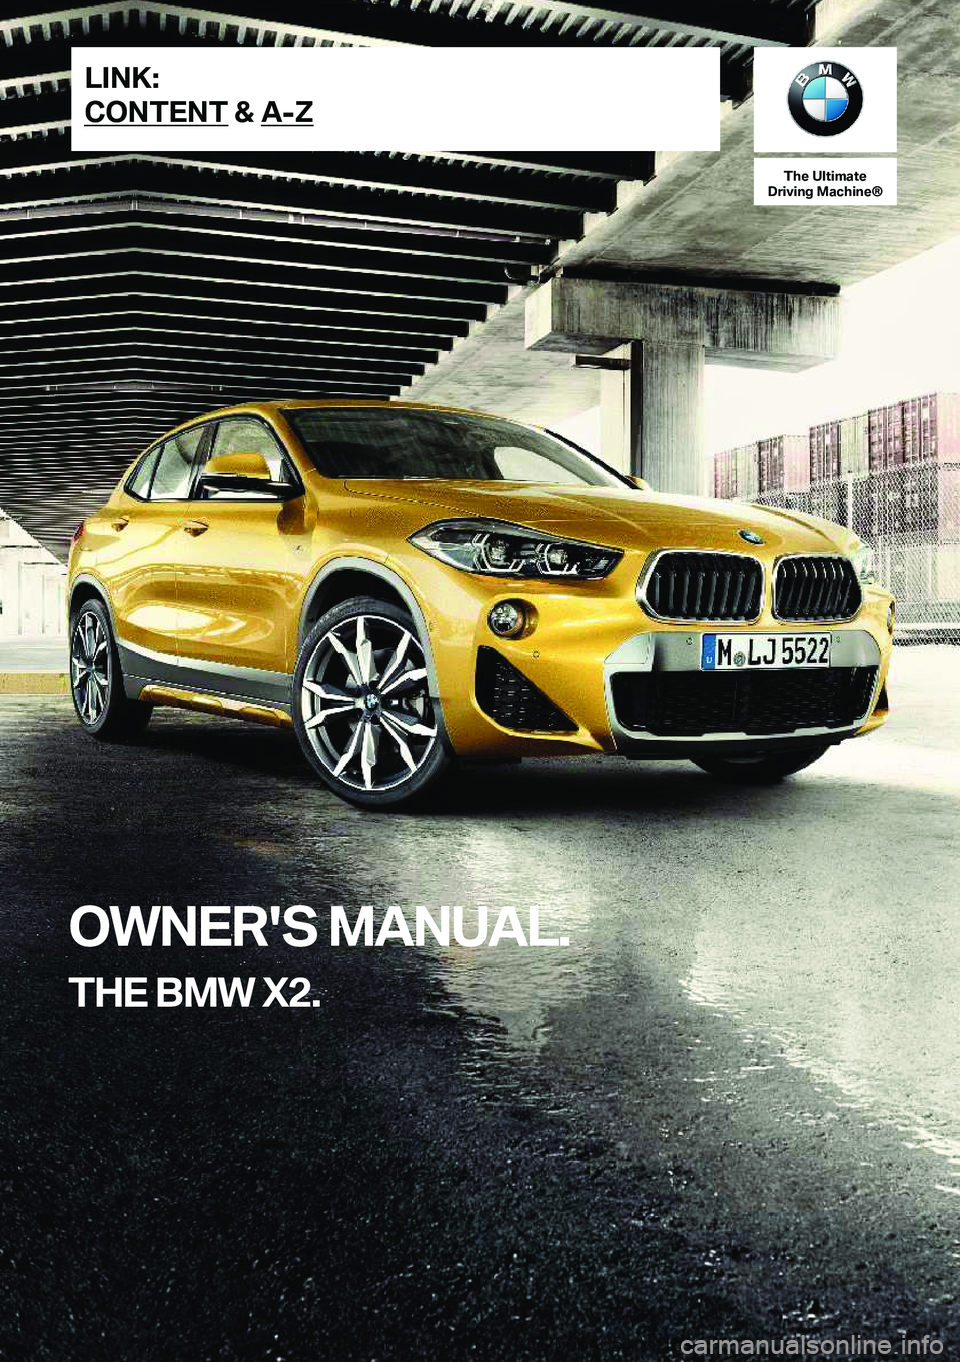 BMW X2 2020  Owners Manual �T�h�e��U�l�t�i�m�a�t�e
�D�r�i�v�i�n�g��M�a�c�h�i�n�e�n
�O�W�N�E�R�'�S��M�A�N�U�A�L�.
�T�H�E��B�M�W��X�2�.�L�I�N�K�:
�C�O�N�T�E�N�T��&��A�-�Z�O�n�l�i�n�e��E�d�i�t�i�o�n��f�o�r��P�a�r�t�